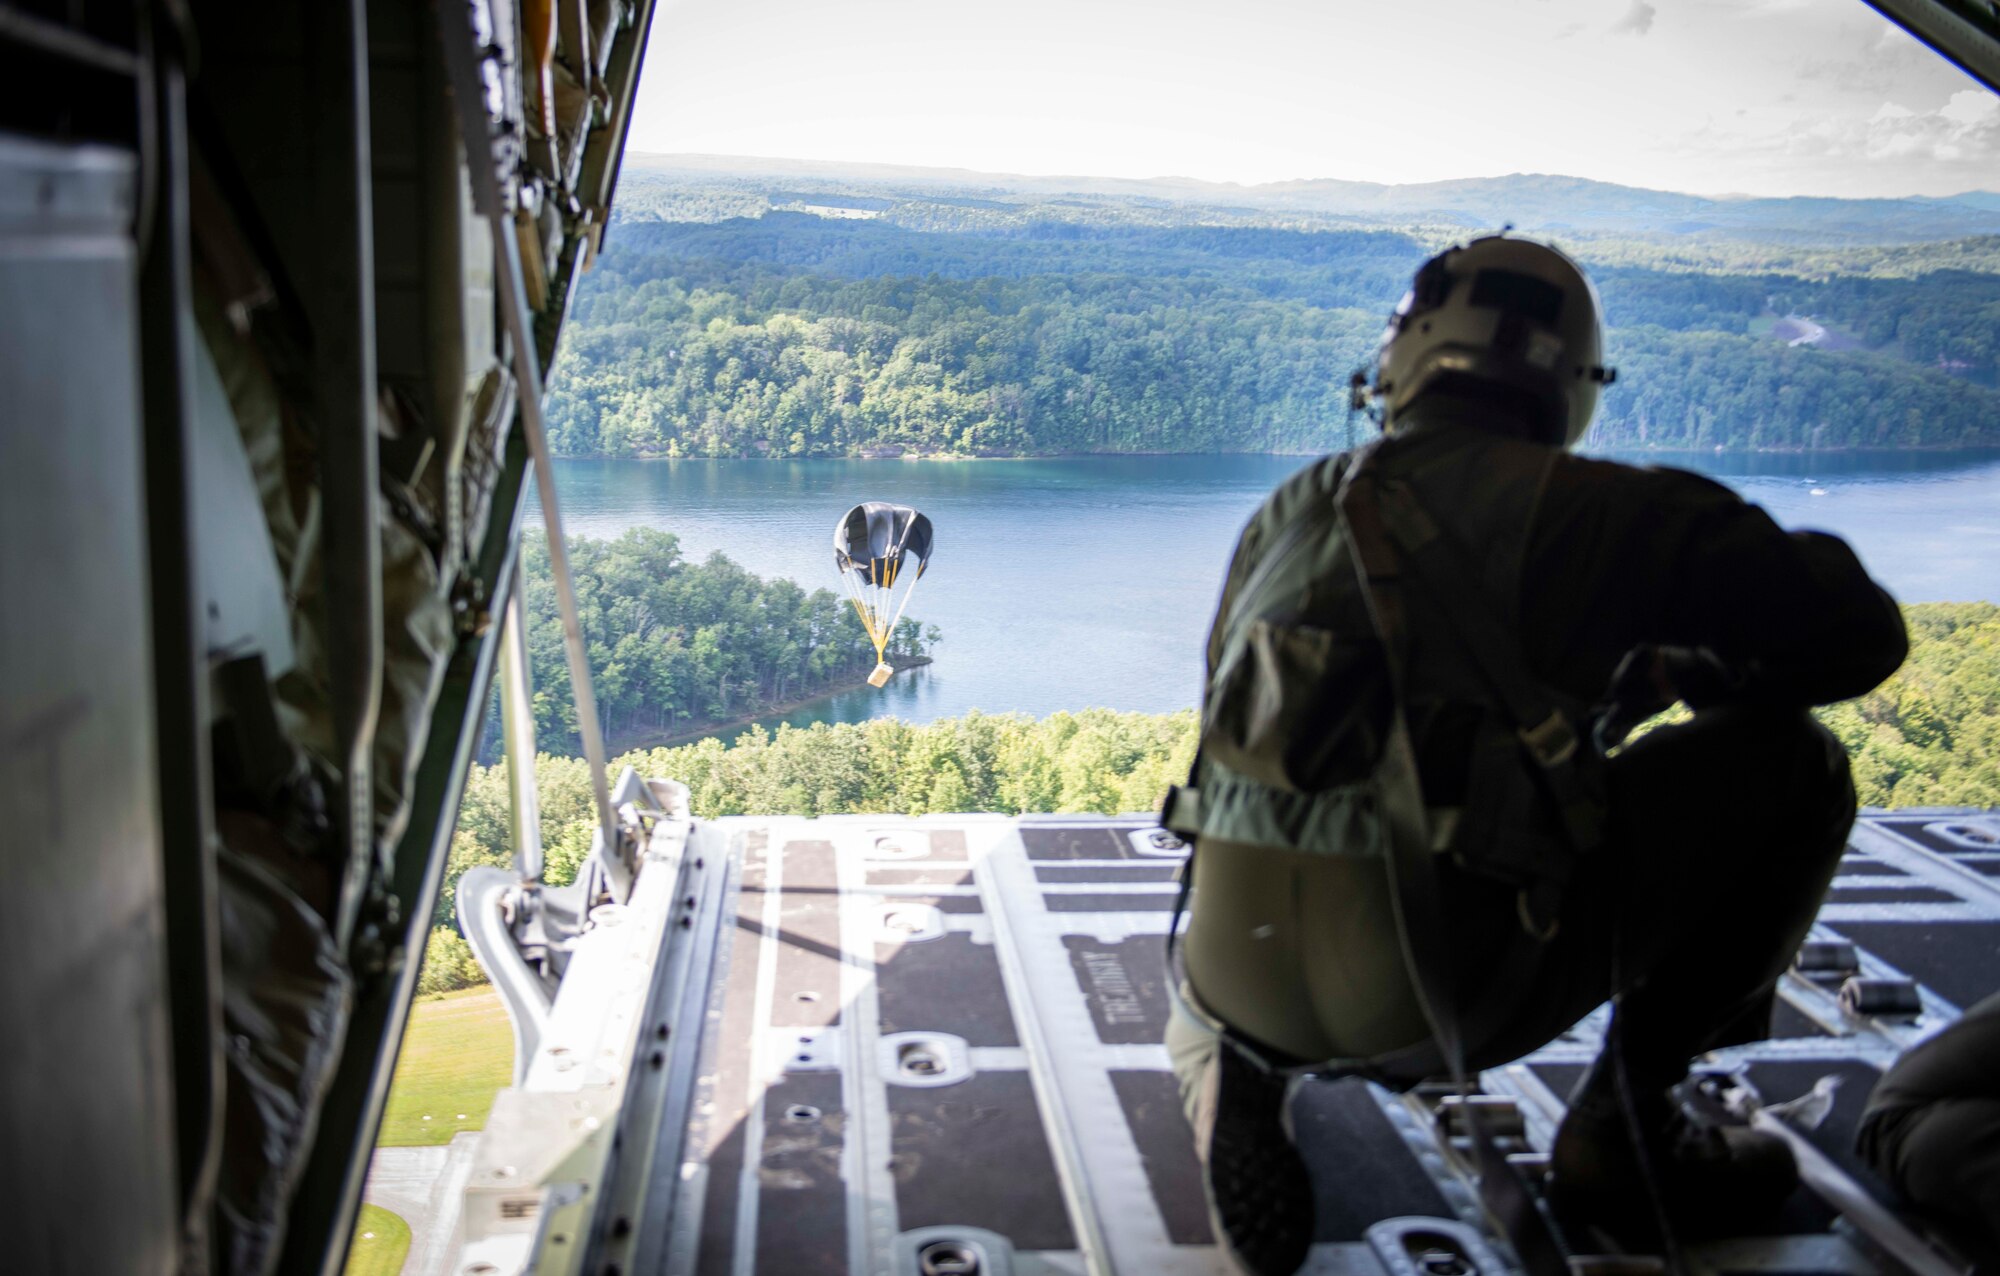 Air Force Reserve loadmaster watches cargo descend toward a drop zone after it is pushed out of the back of a C-130J Super Hercules near Charleston, W. Va., Aug. 23, 2020. Eight C-130s and Reserve and Guard partners converge to participate in a week-long training event. The exercise was designed to test the abilities of Air Force Reserve units to execute rapid global mobility missions in challenging, contested scenarios. (U.S. Air Force Reserve photo by Senior Airman Nathan Byrnes)